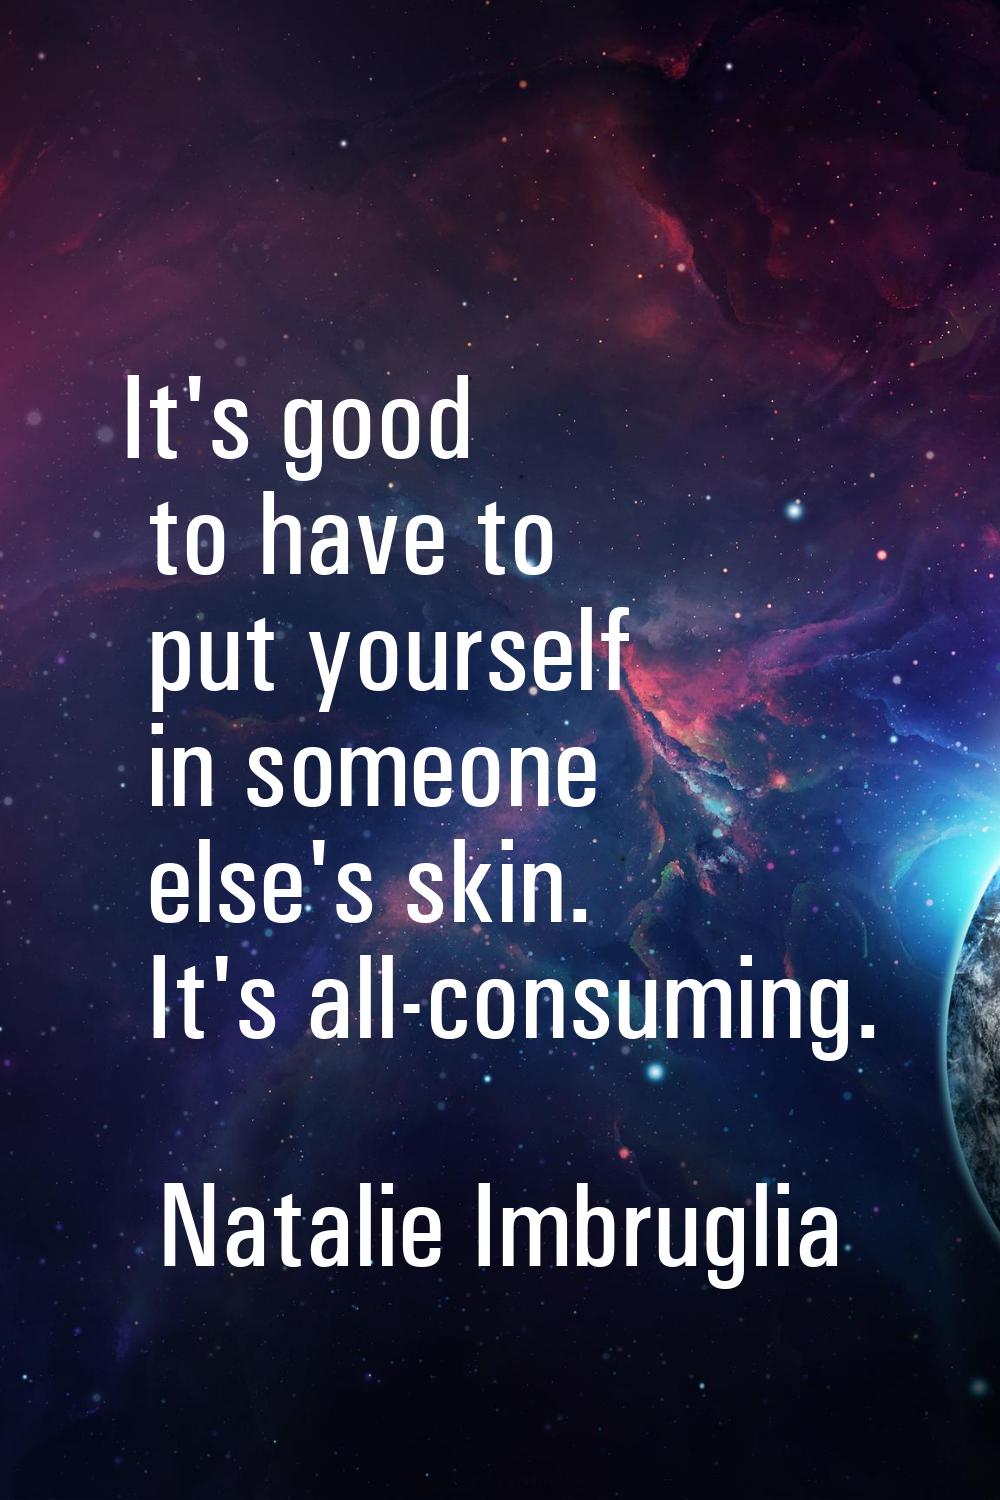 It's good to have to put yourself in someone else's skin. It's all-consuming.